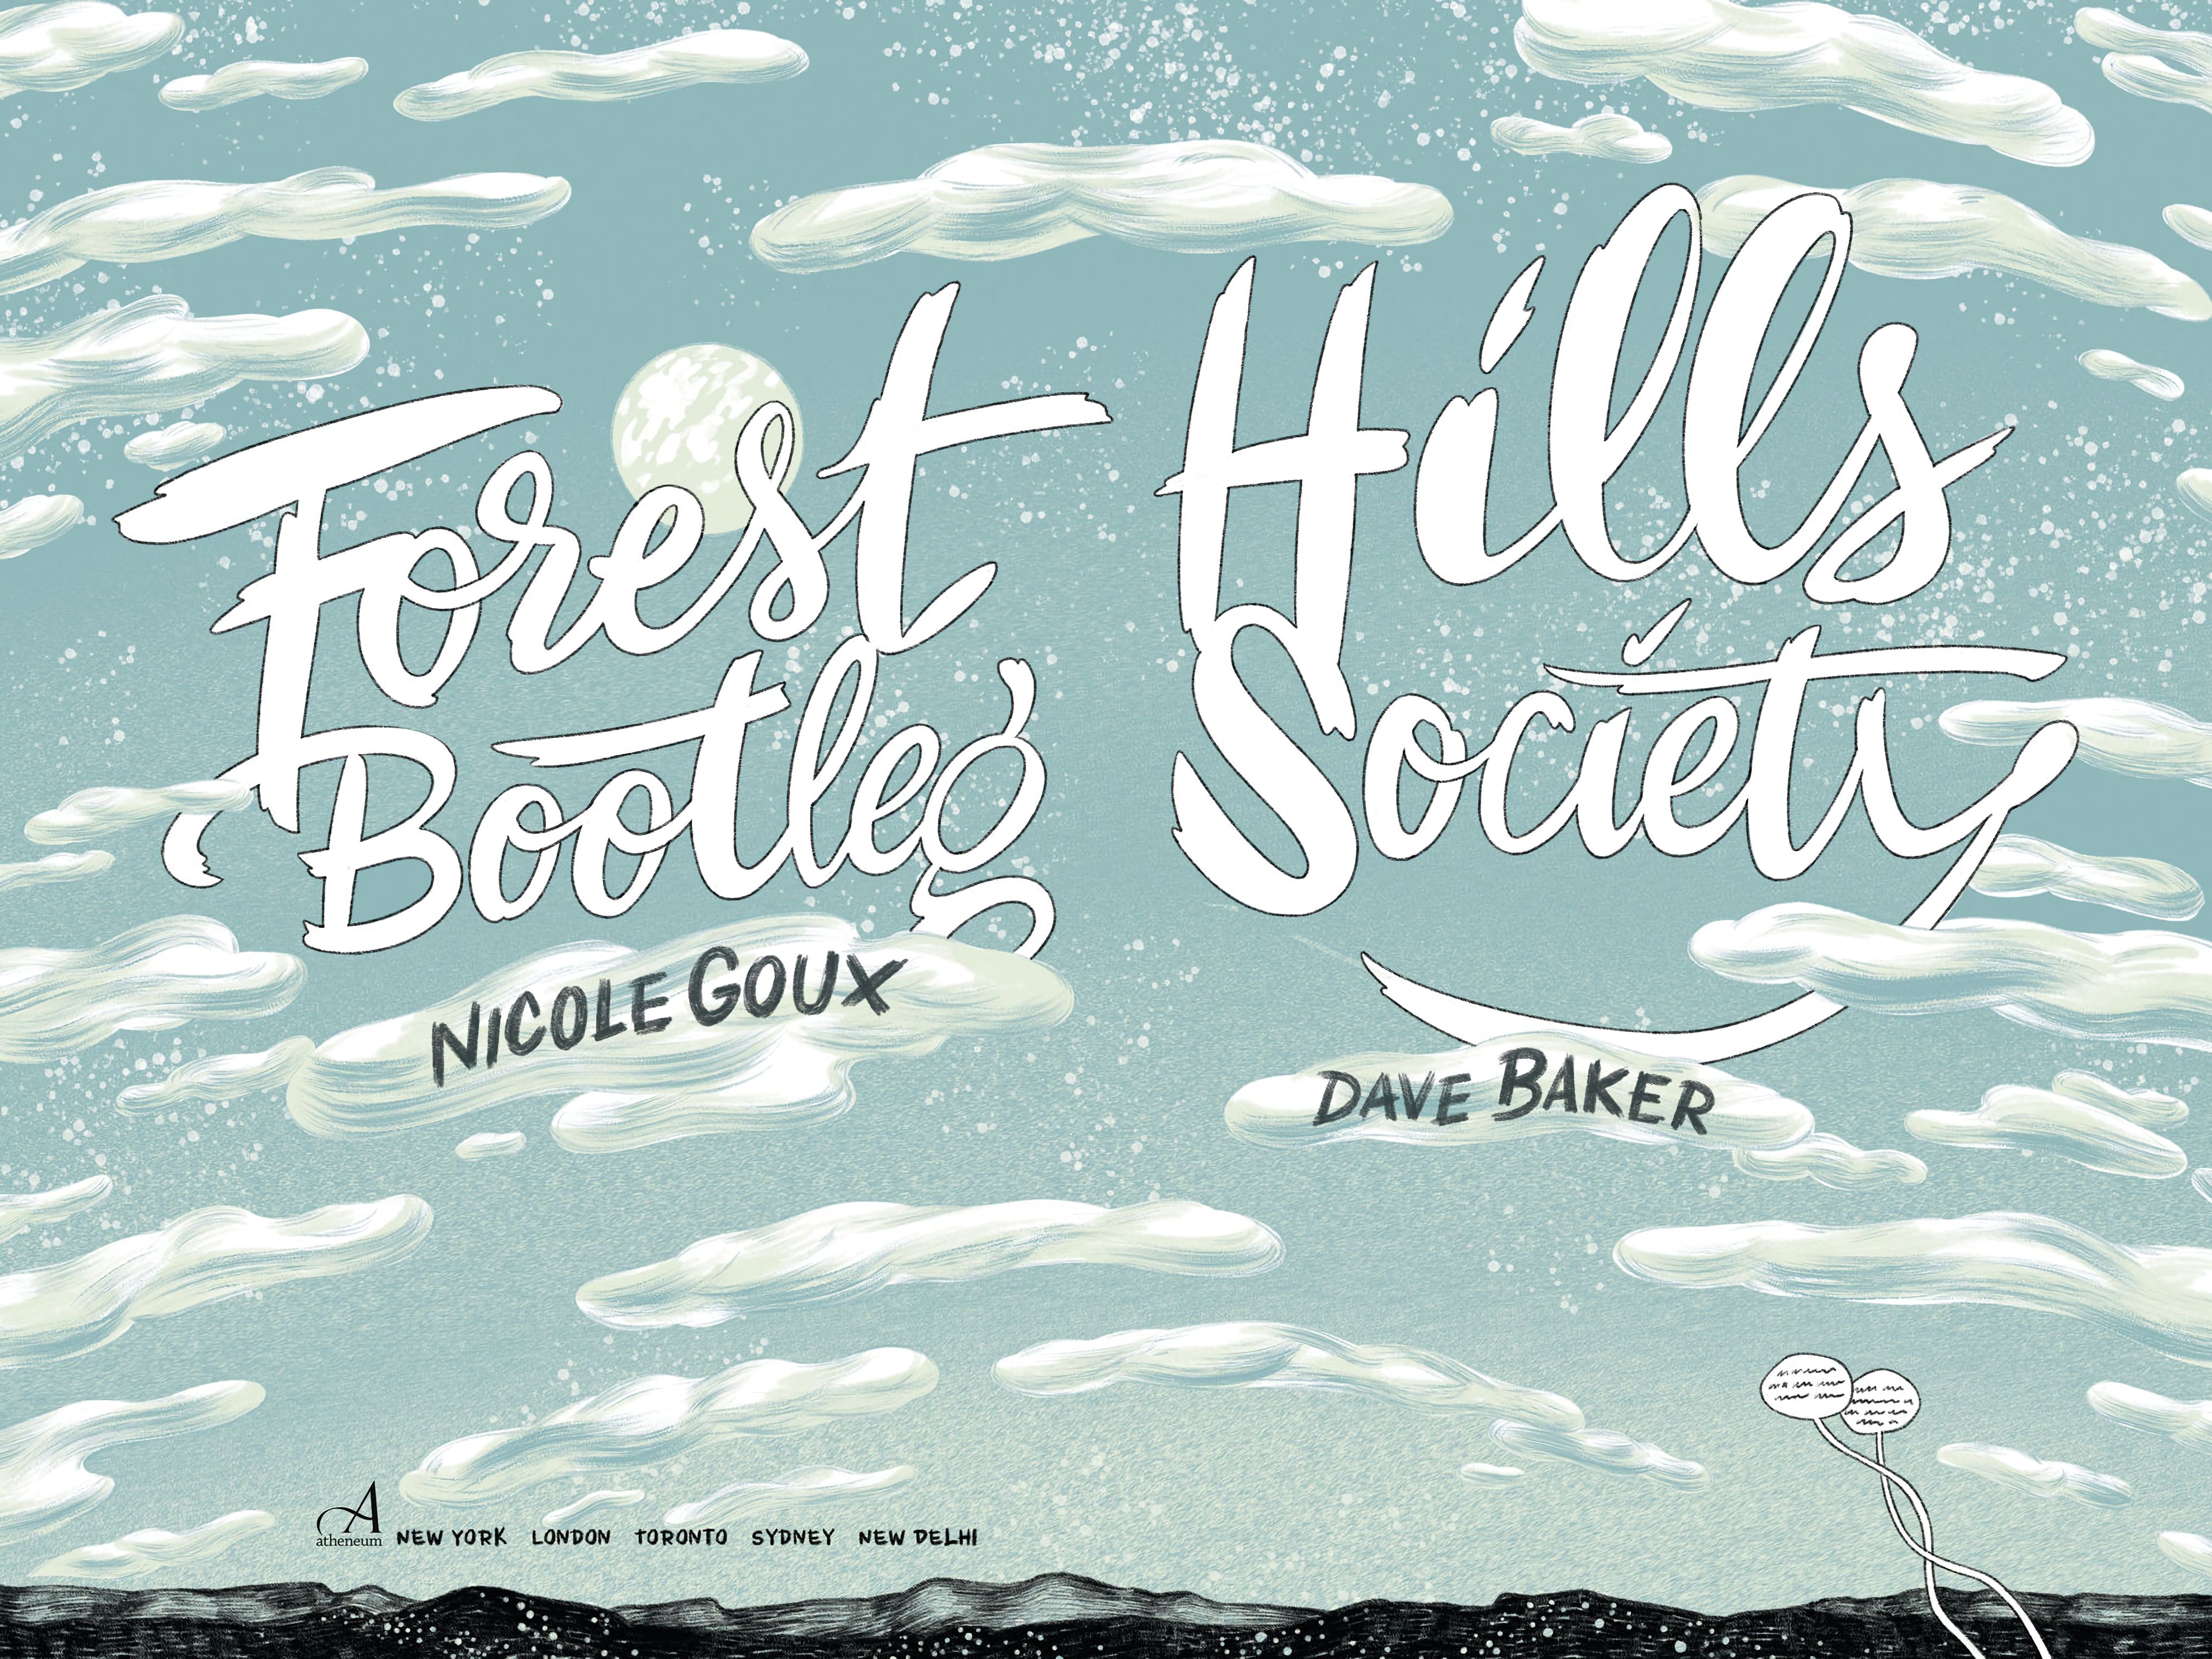 Read online Forest Hills Bootleg Society comic -  Issue # TPB (Part 1) - 6